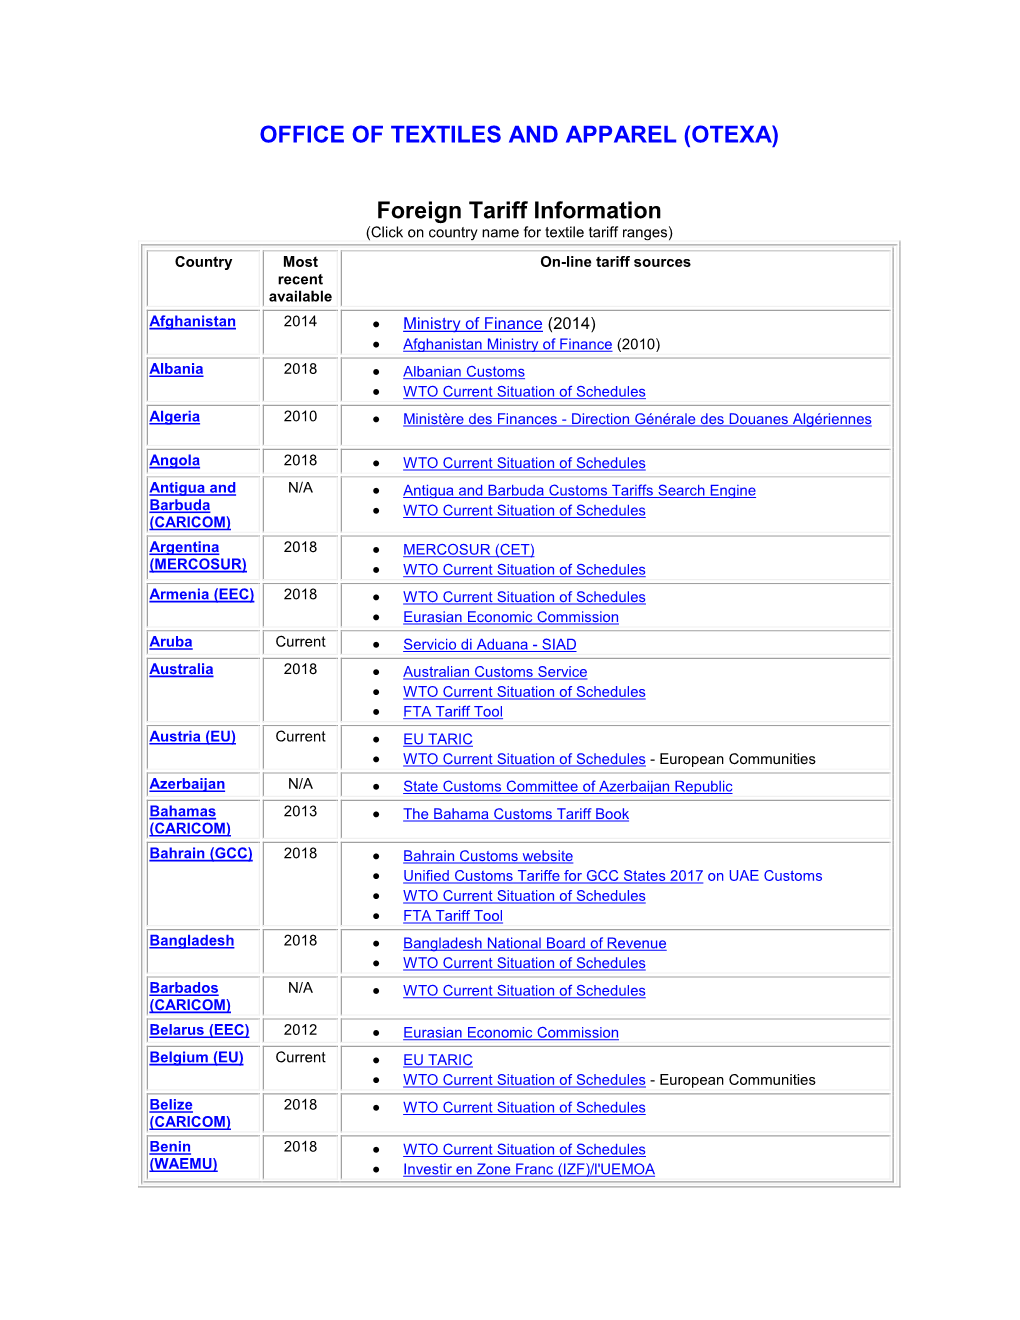 OFFICE of TEXTILES and APPAREL (OTEXA) Foreign Tariff Information